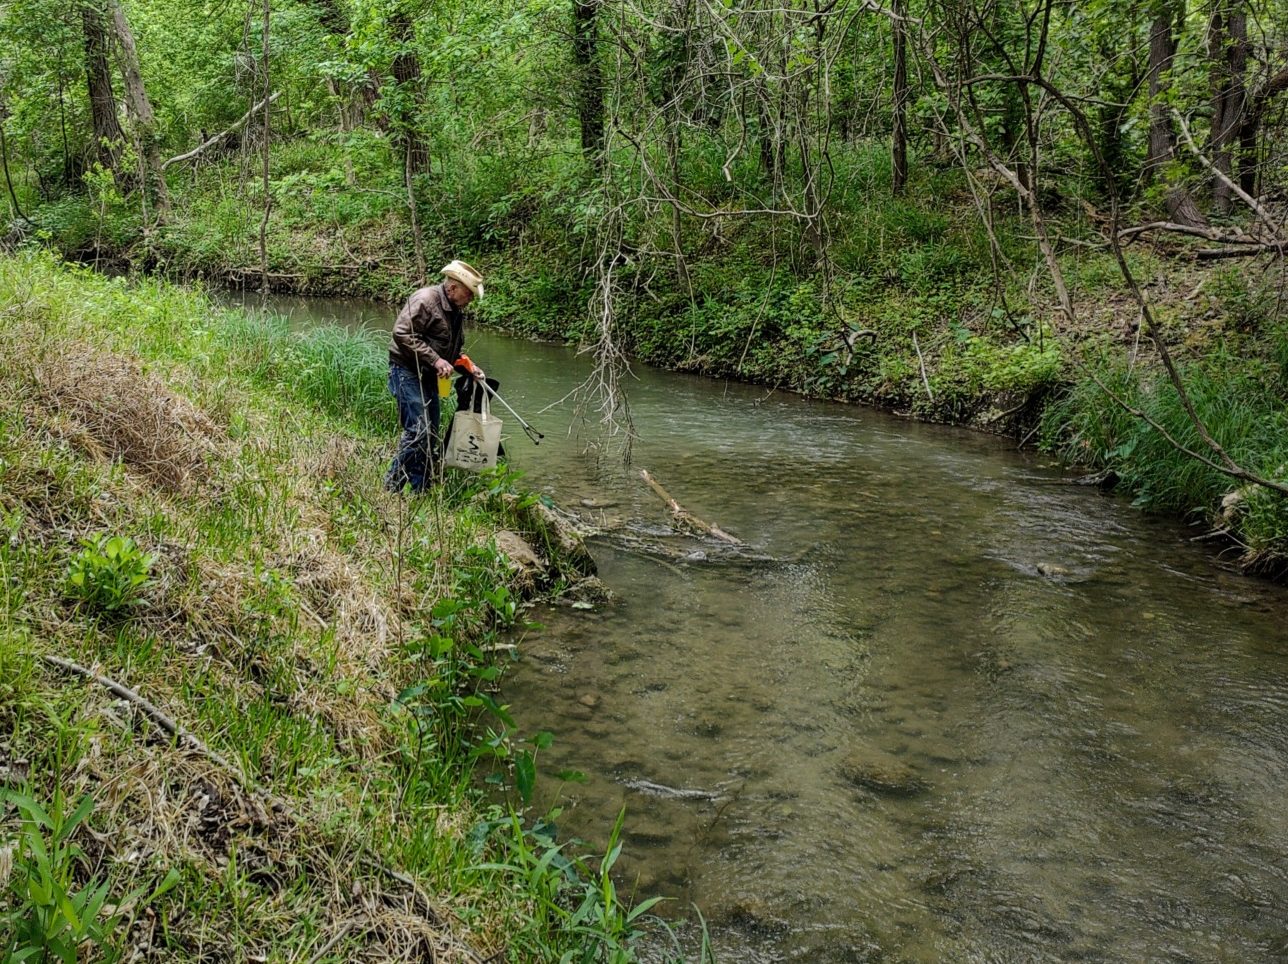 An older white man wearing a straw-colored cowboy hat, a long-sleeved shirt, and blue jeans stands on the bank of a shallow curving creek. He is holding a grabbing tool and a bucket. He appears to be reaching for something at the edge of the water with the grabbing tool. The man is a participant from the Spring Cleanup Event for the Geronimo and Alligator creek watershed.